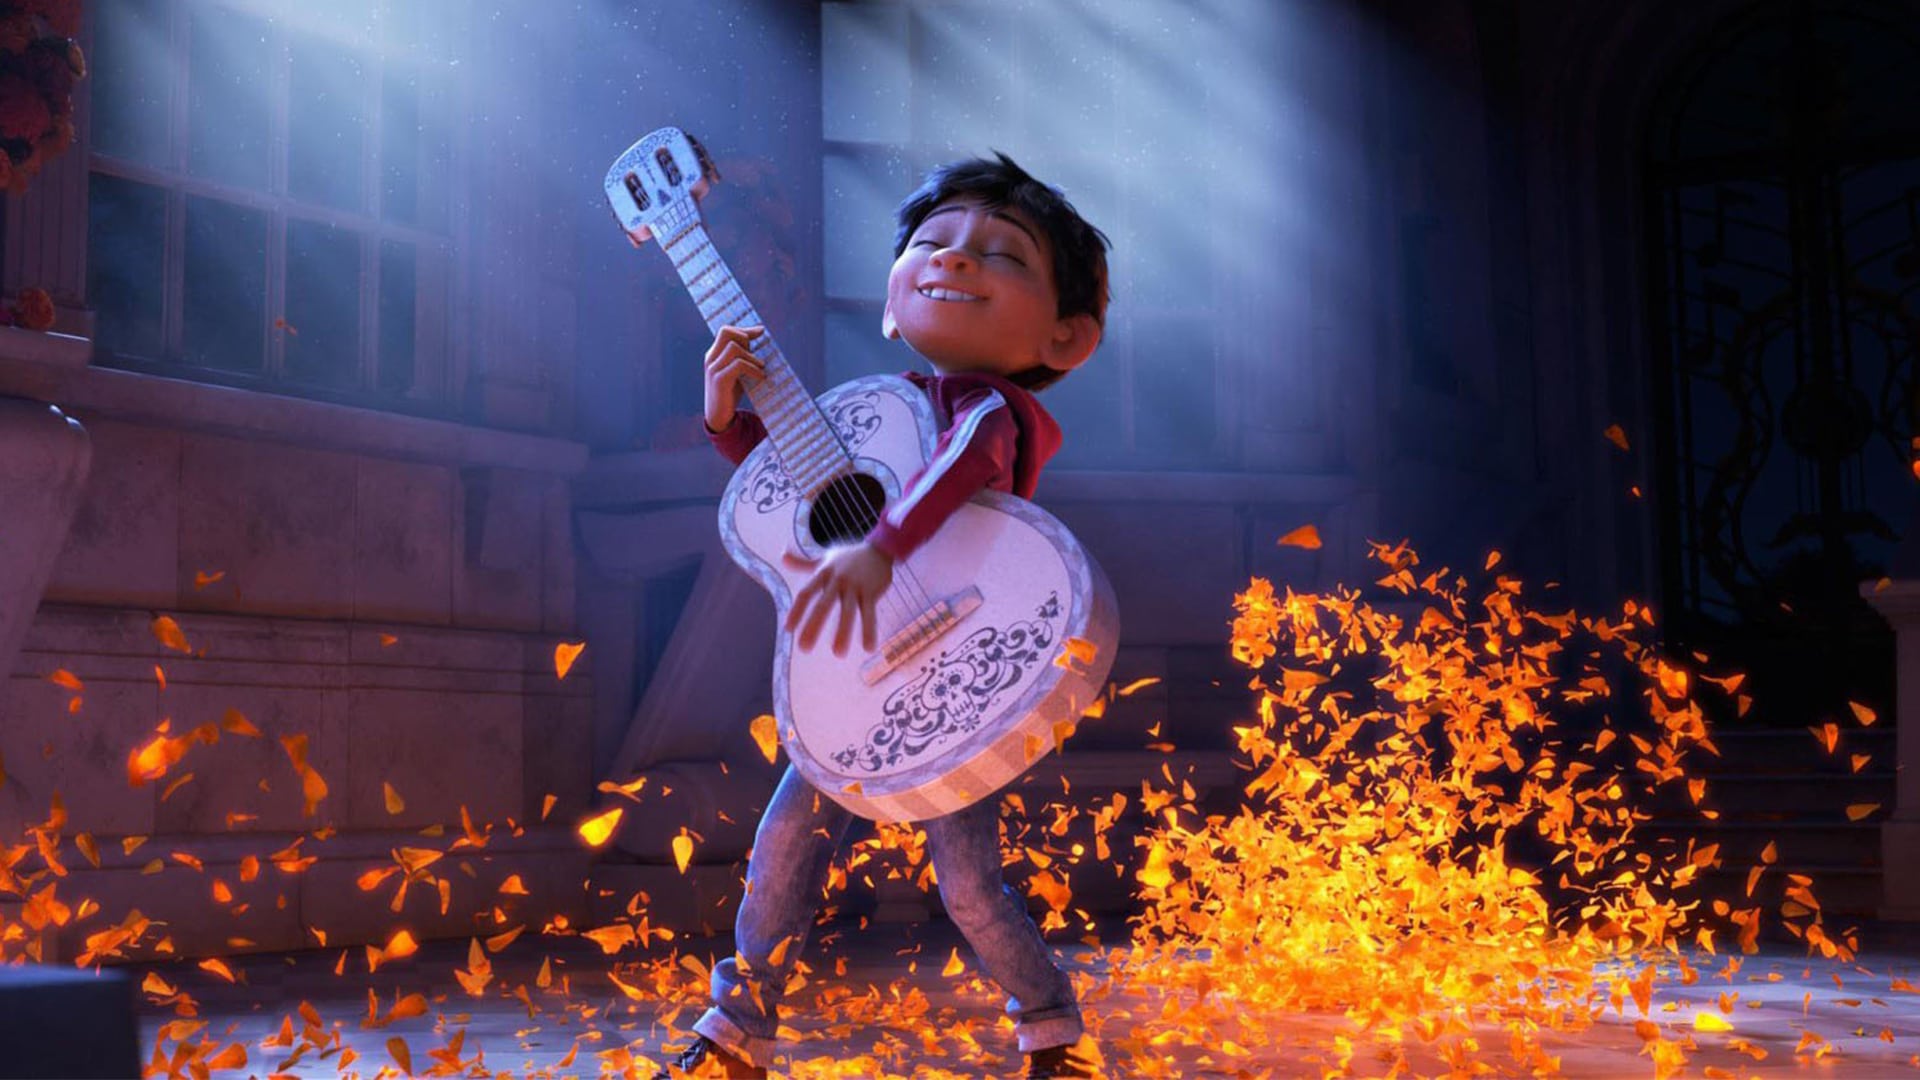 Coco' Review: A Sweet Family Tale That Joins the Ranks of Pixar's Best